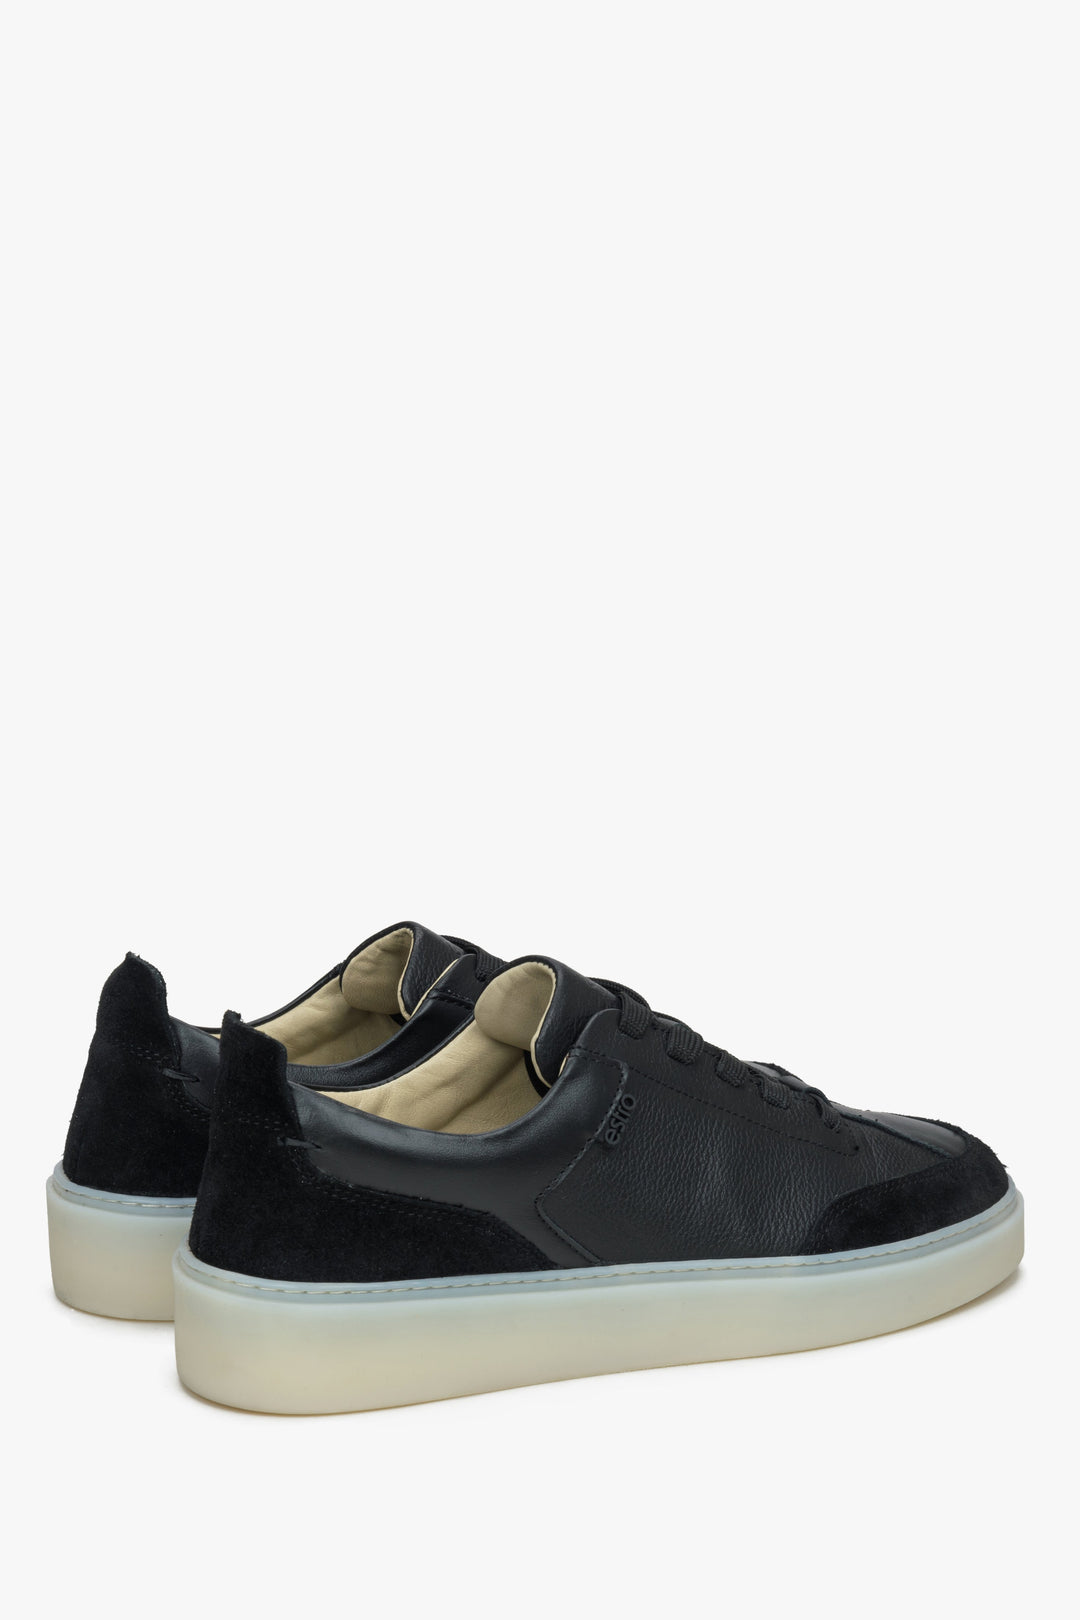 Estro women's black leather-velour sneakers - close-up on the heel counter and side profile.